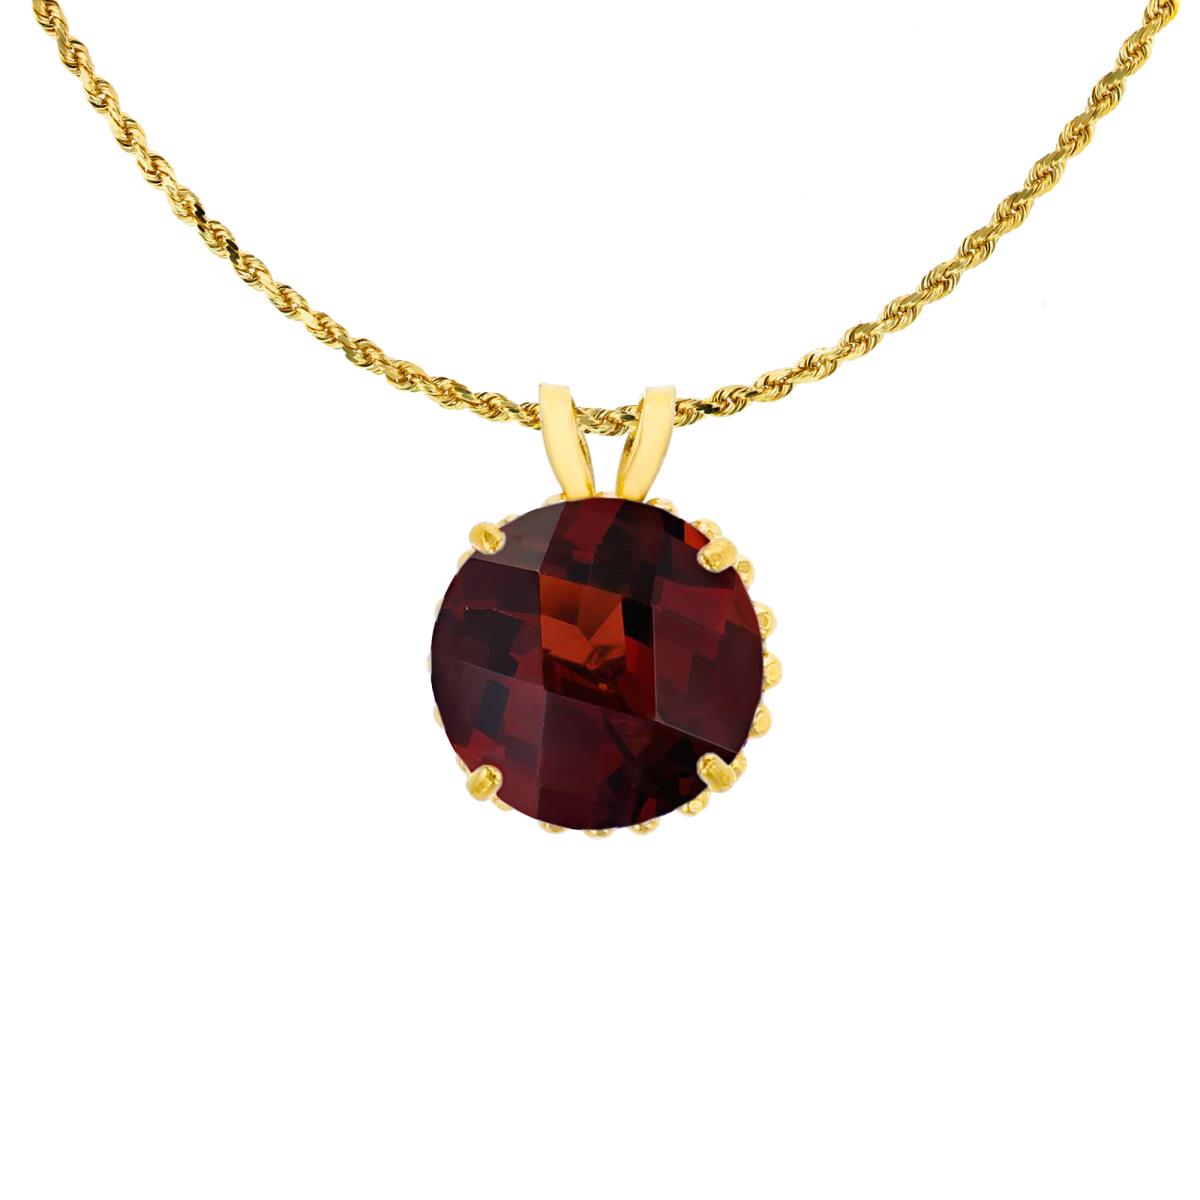 10K Yellow Gold 7mm Rd Cut Garnet with Bead Frame Rabbit Ear 18" Rope Chain Necklace